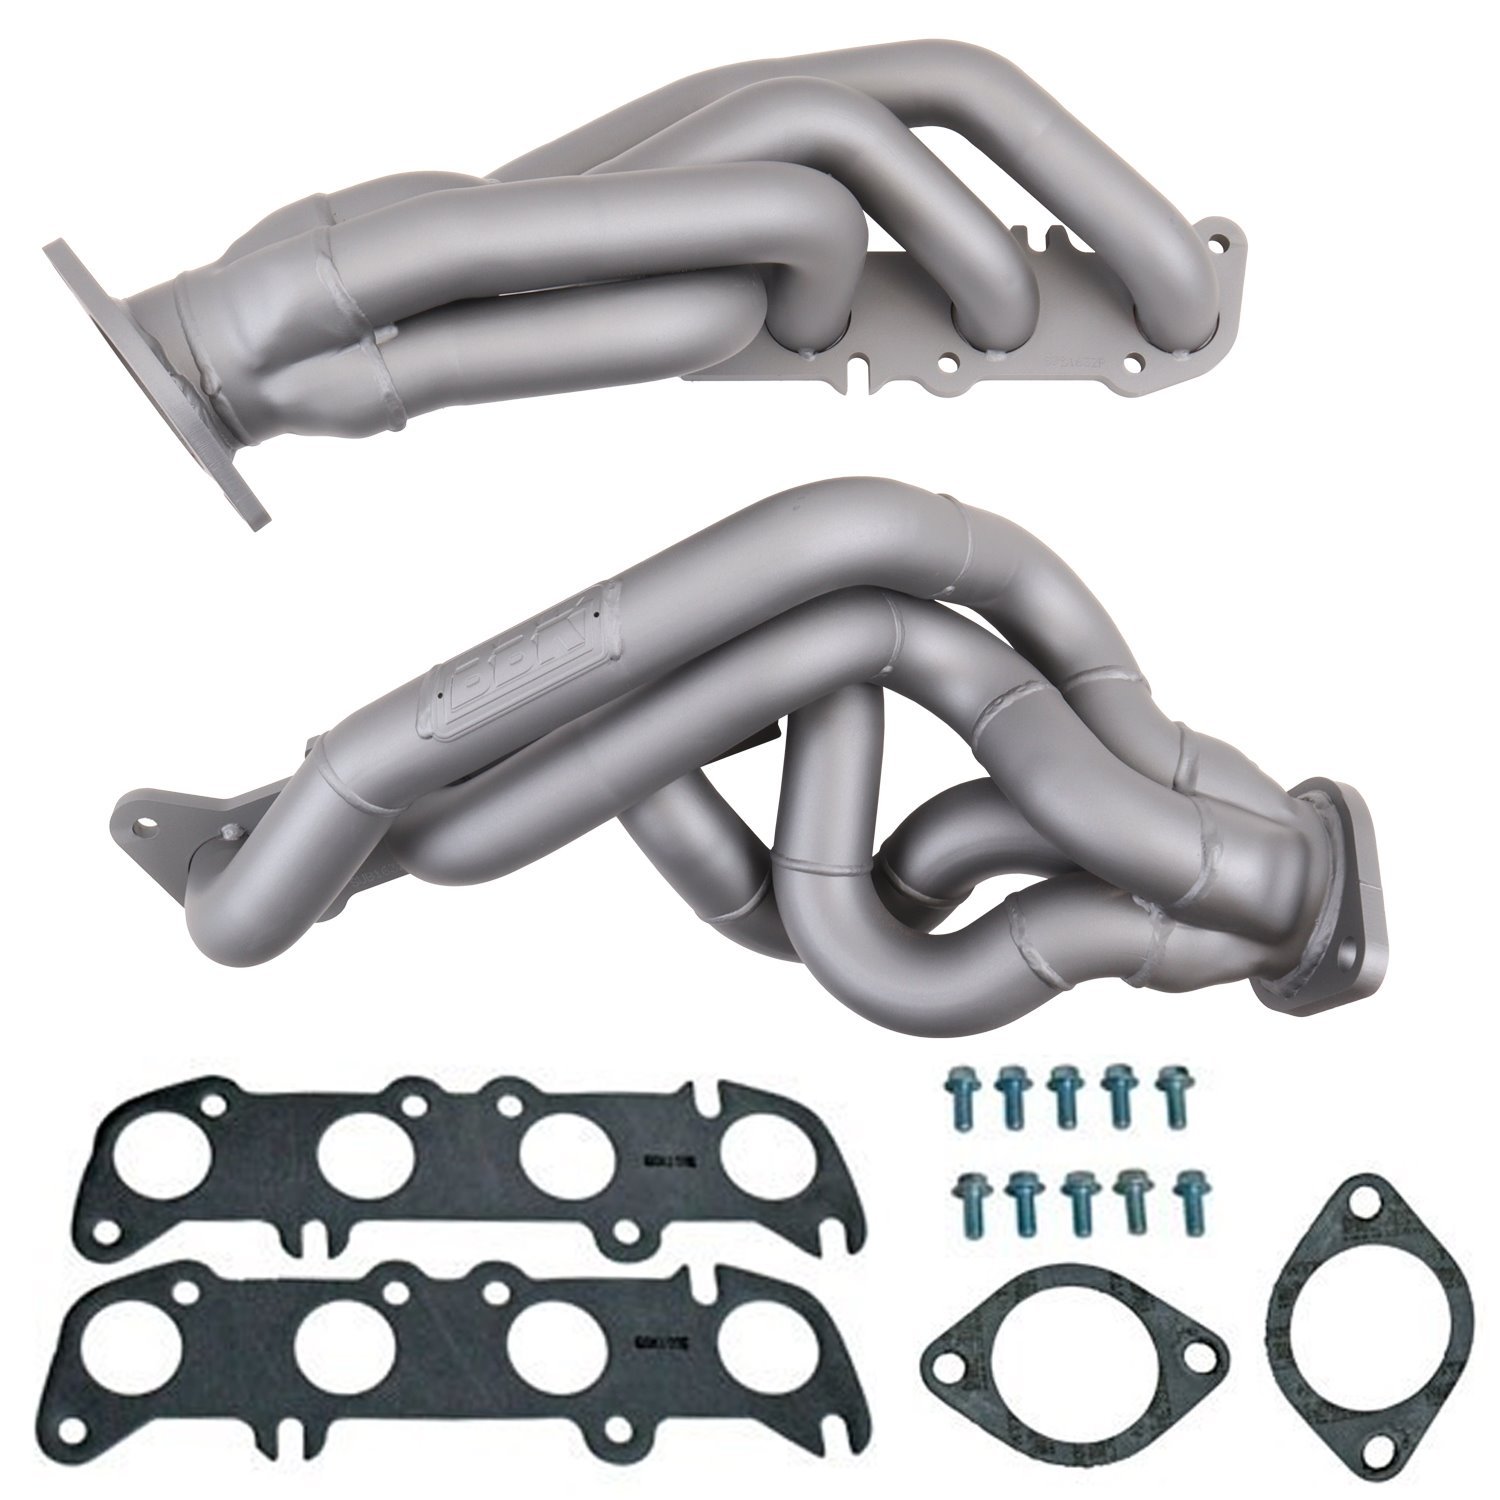 Tuned Length Shorty Headers 2011-2014 Ford Mustang GT 5.0L